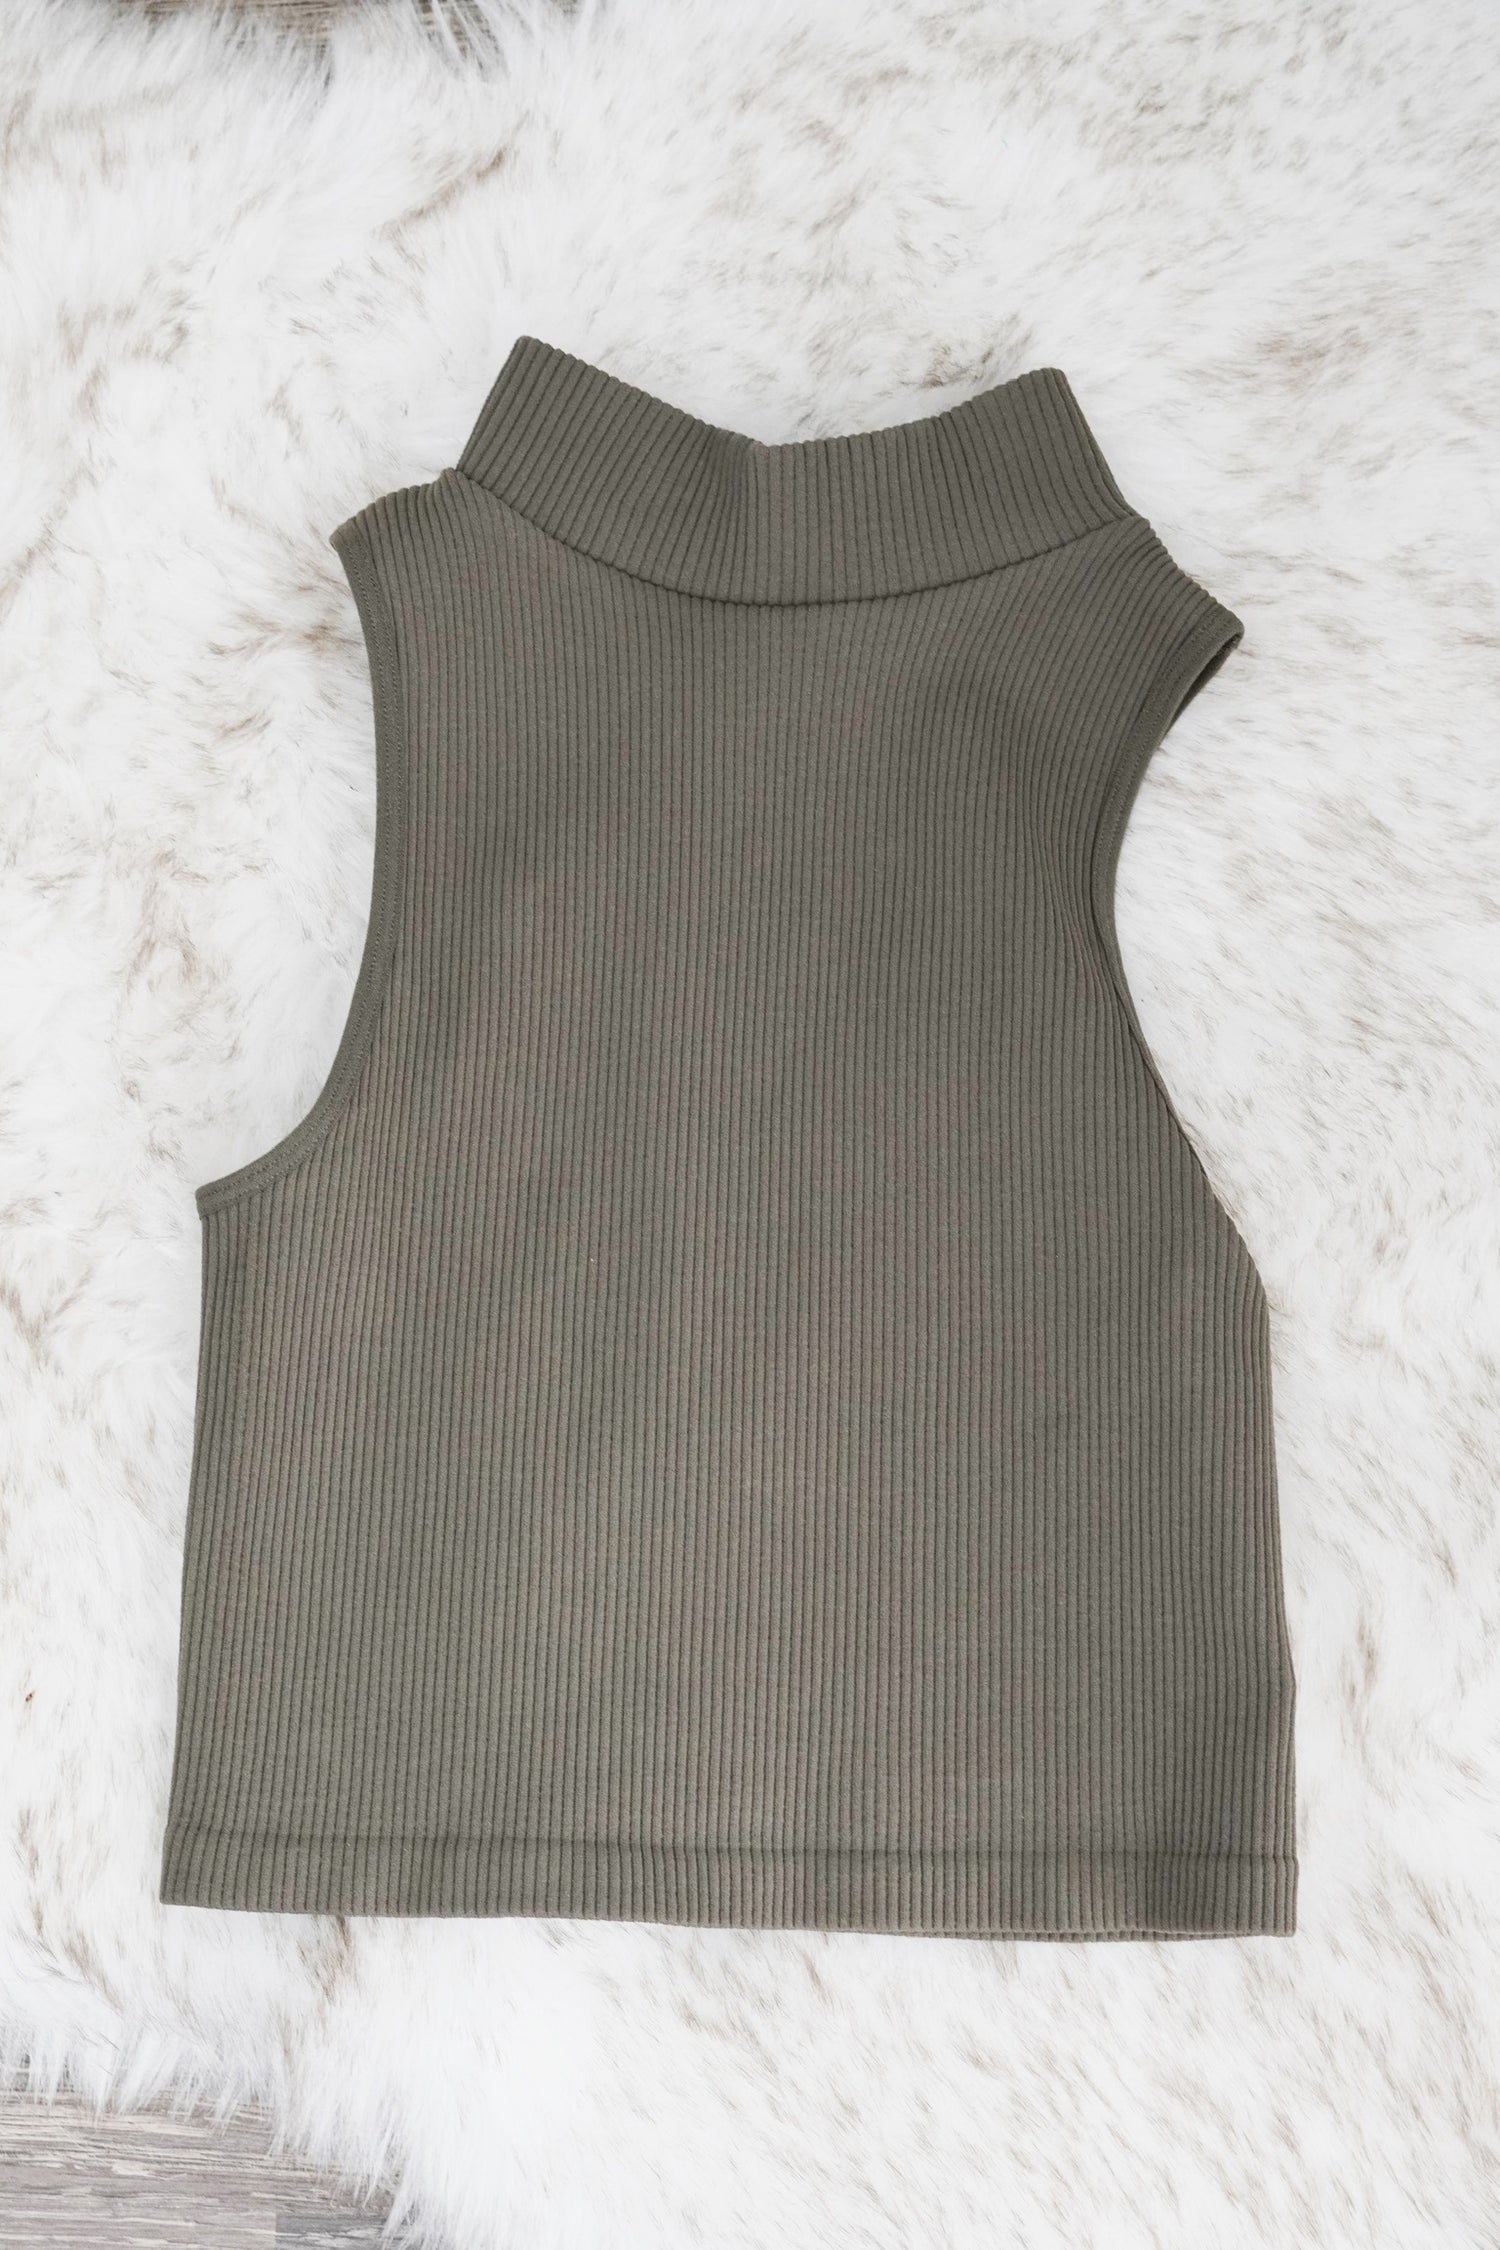 Mer Mock Neck Sleeveless Top Mock Neckline Sleeveless Ribbed Material Colors: Olive Fitted Cropped 92% Nylon, 8% Spandex